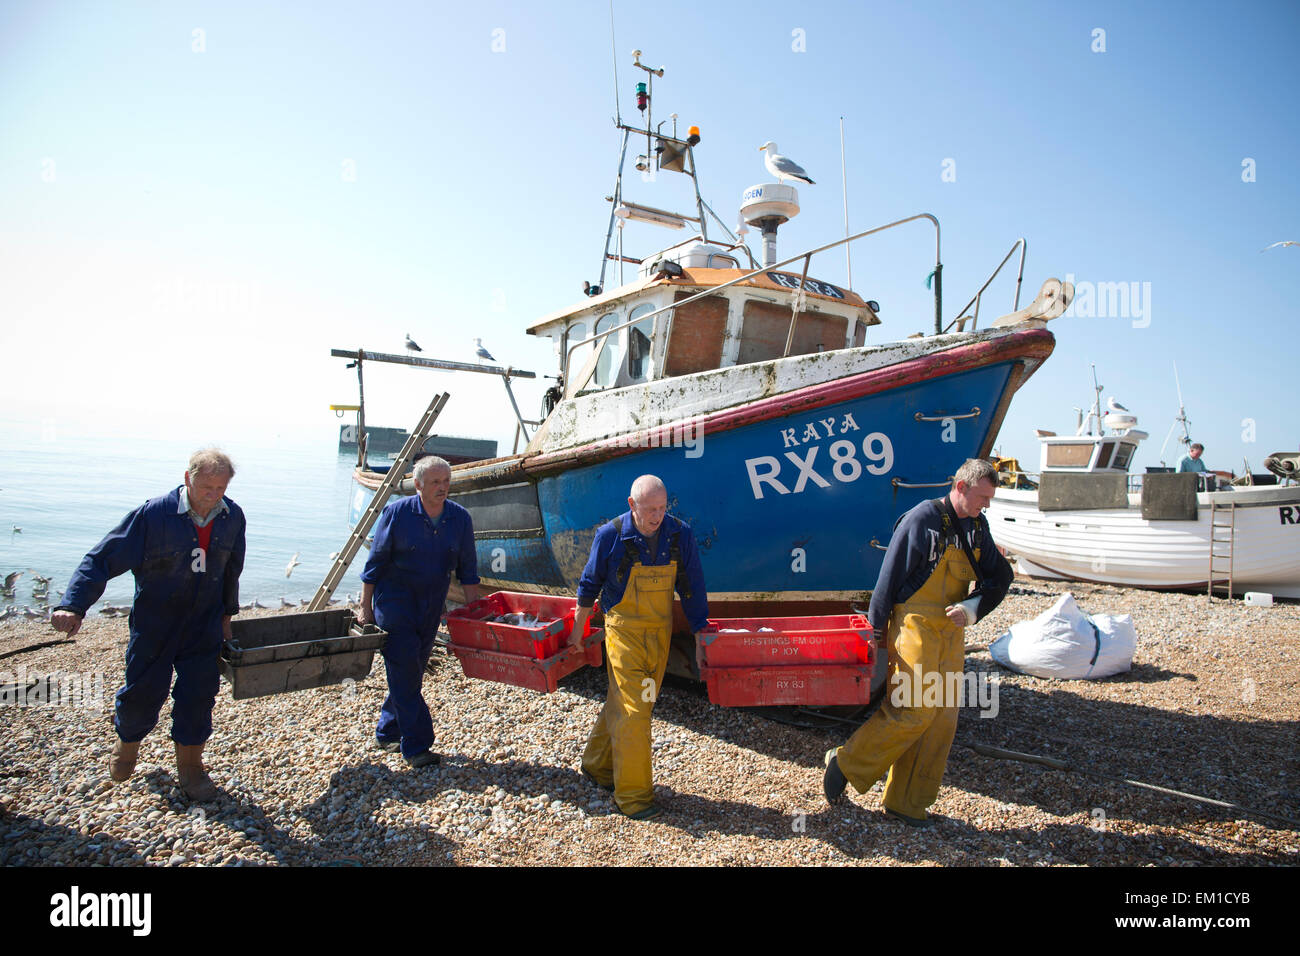 Hastings, East Sussex, UK. 15th April, 2015.  Local fisherman bring in their days catch of sole and mackerel on the beaches of Hastings where temperatures rose above 21 degrees C, East Sussex, England, UK. The Fishing community of Hastings, one of the oldest ports and largest beach-launched fishing fleet in Britain, East Sussex, UK Credit:  Jeff Gilbert/Alamy Live News Stock Photo